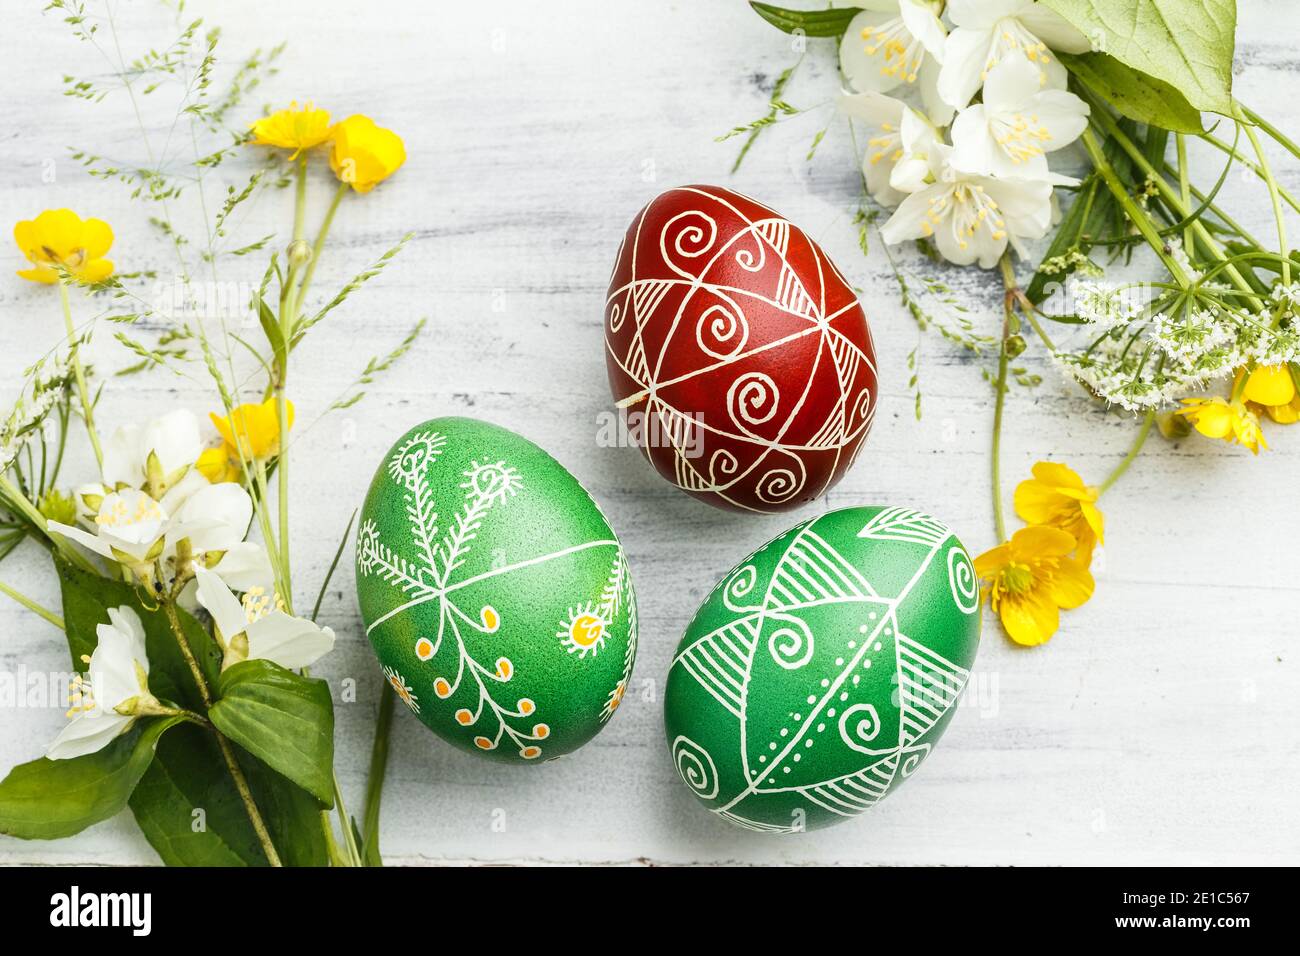 Three pysanky handmade Easter eggs. Ukrainian pysanky decorated with wax-resist dyeing technique. Holiday postcard Stock Photo